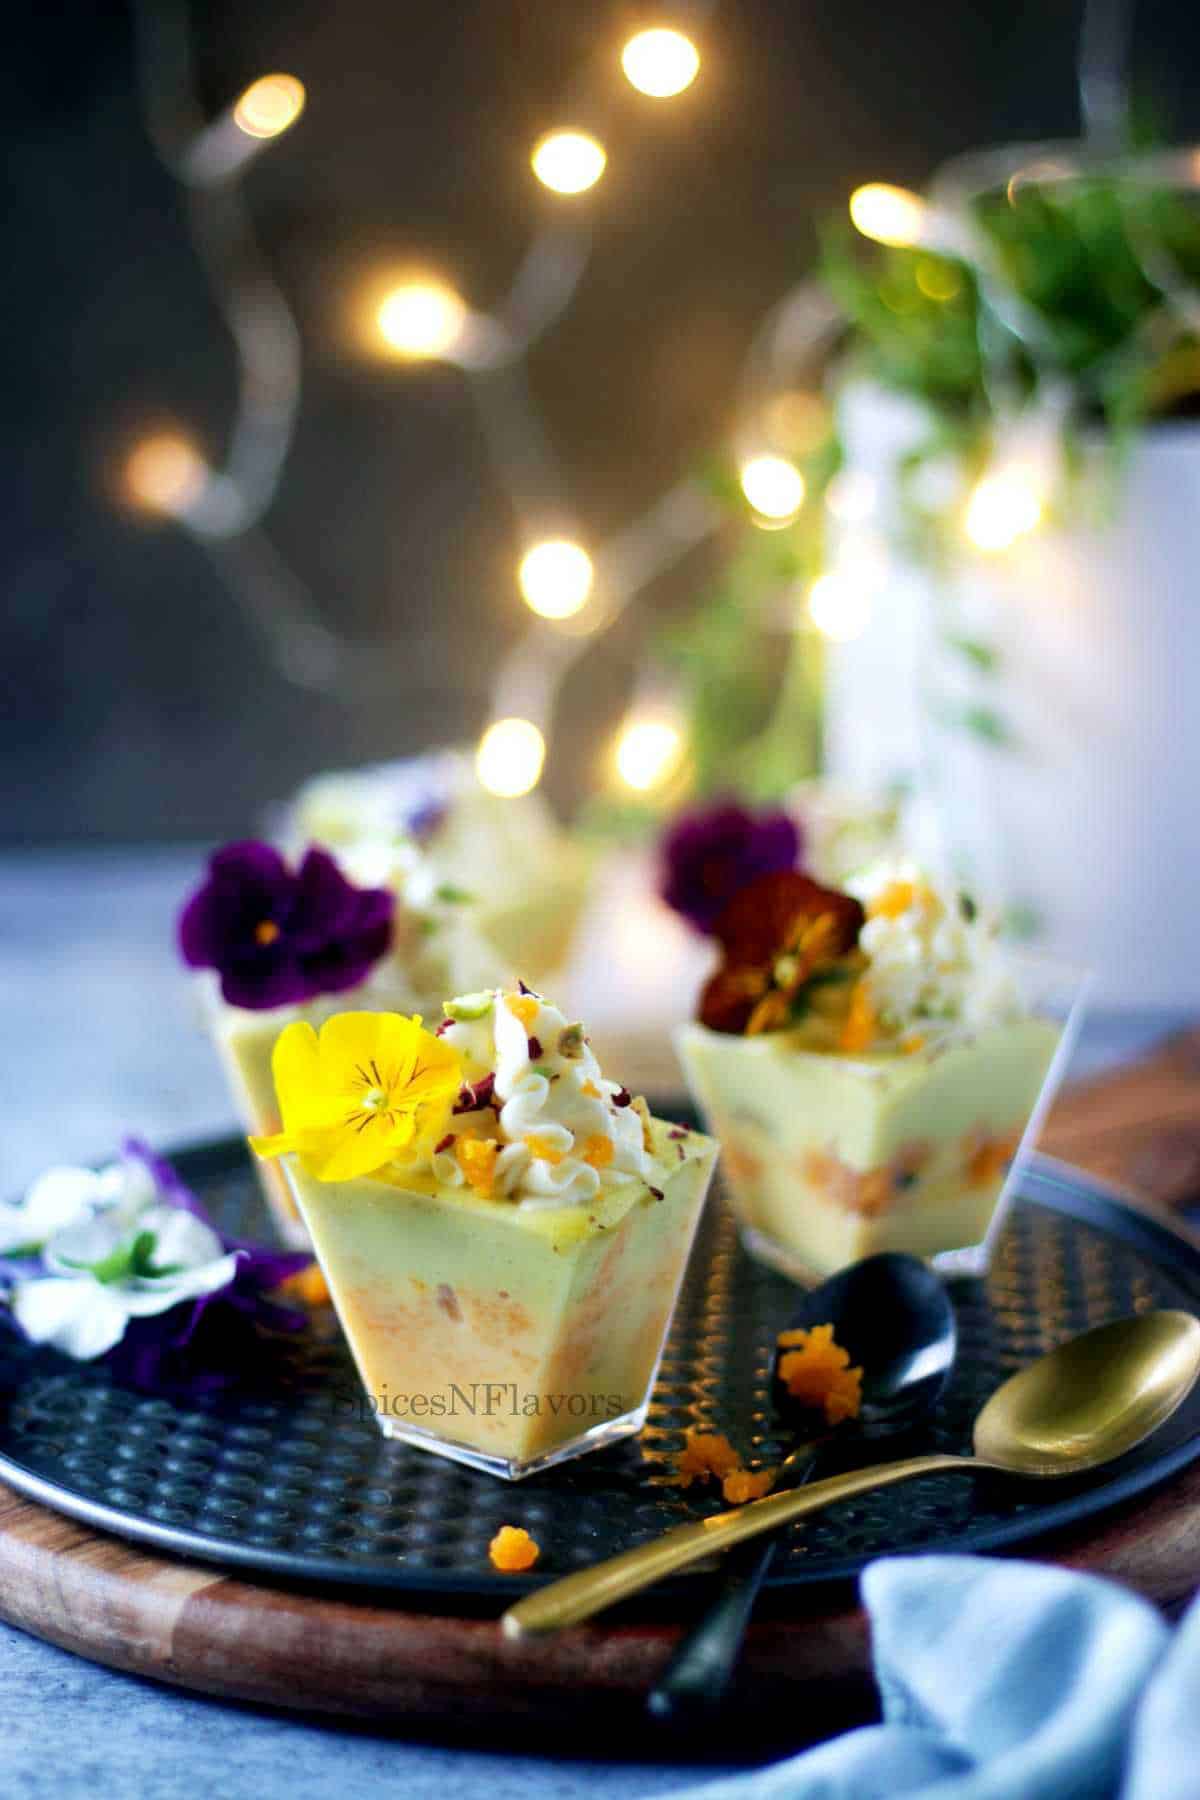 rasmalai trifle shot glasses decorated with edible flowers